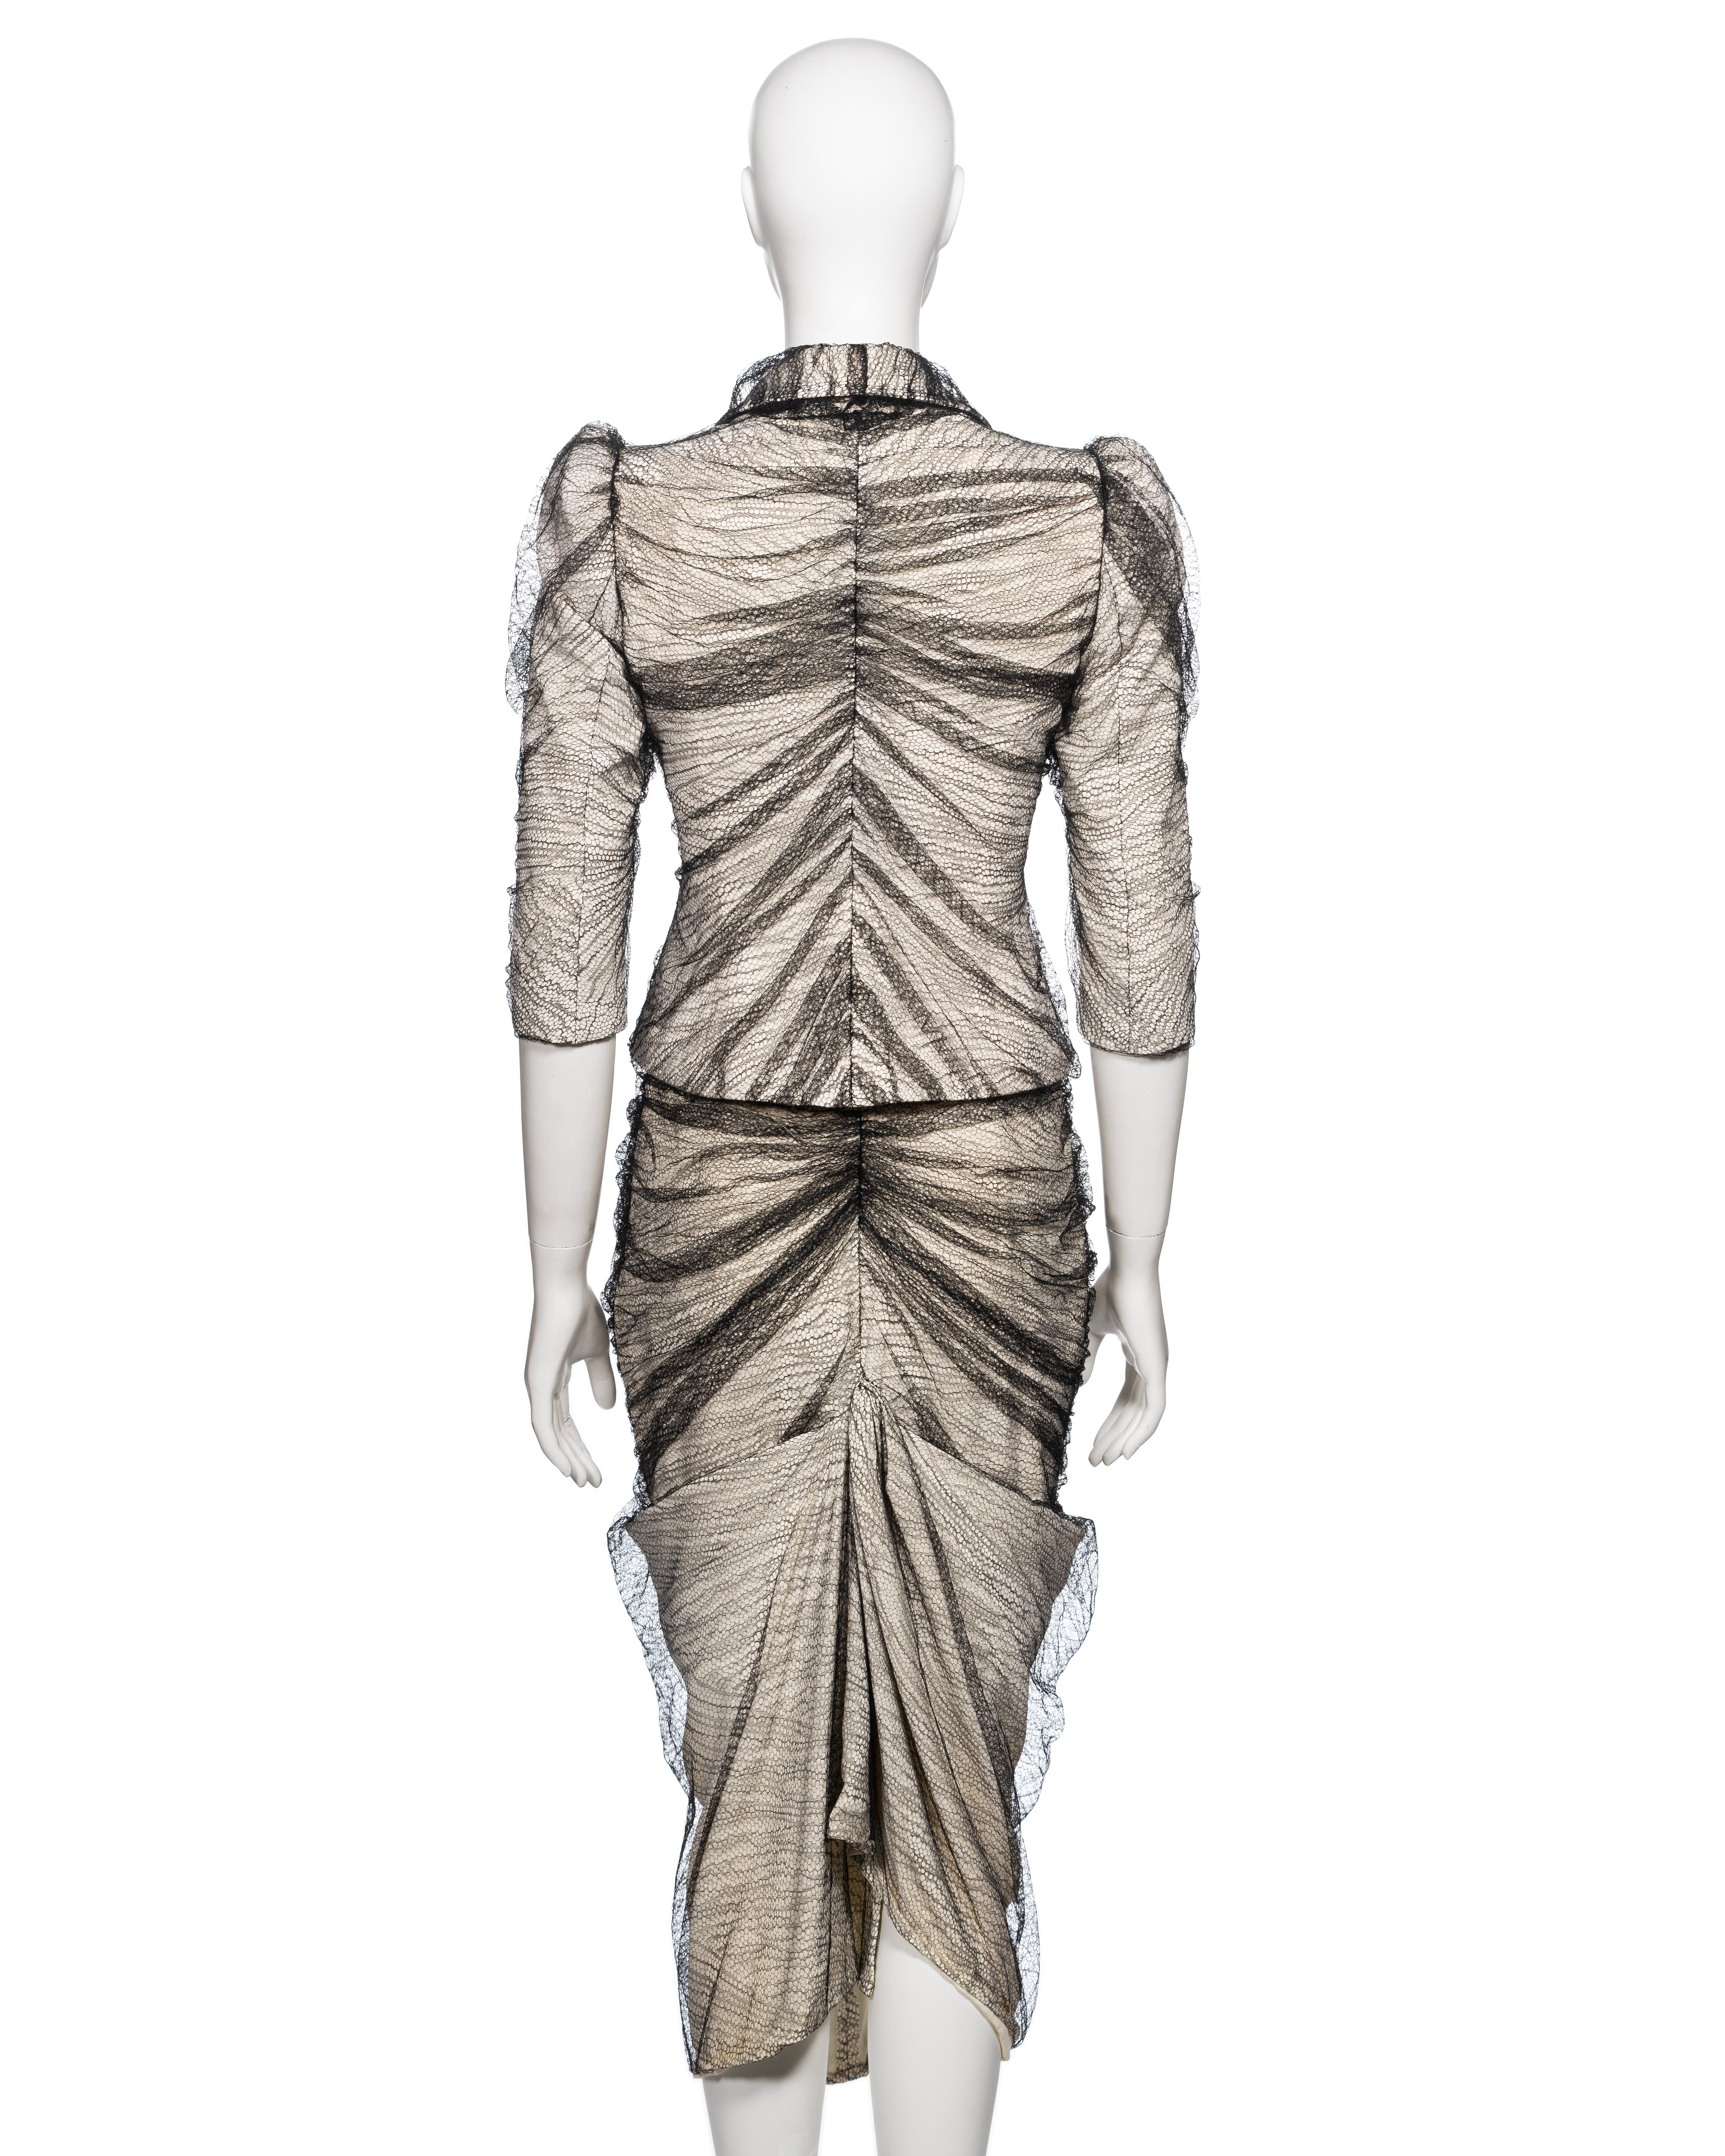 Alexander McQueen 'Sarabande' Ivory Skirt Suit with Black Lace Overlay, SS 2007 For Sale 7